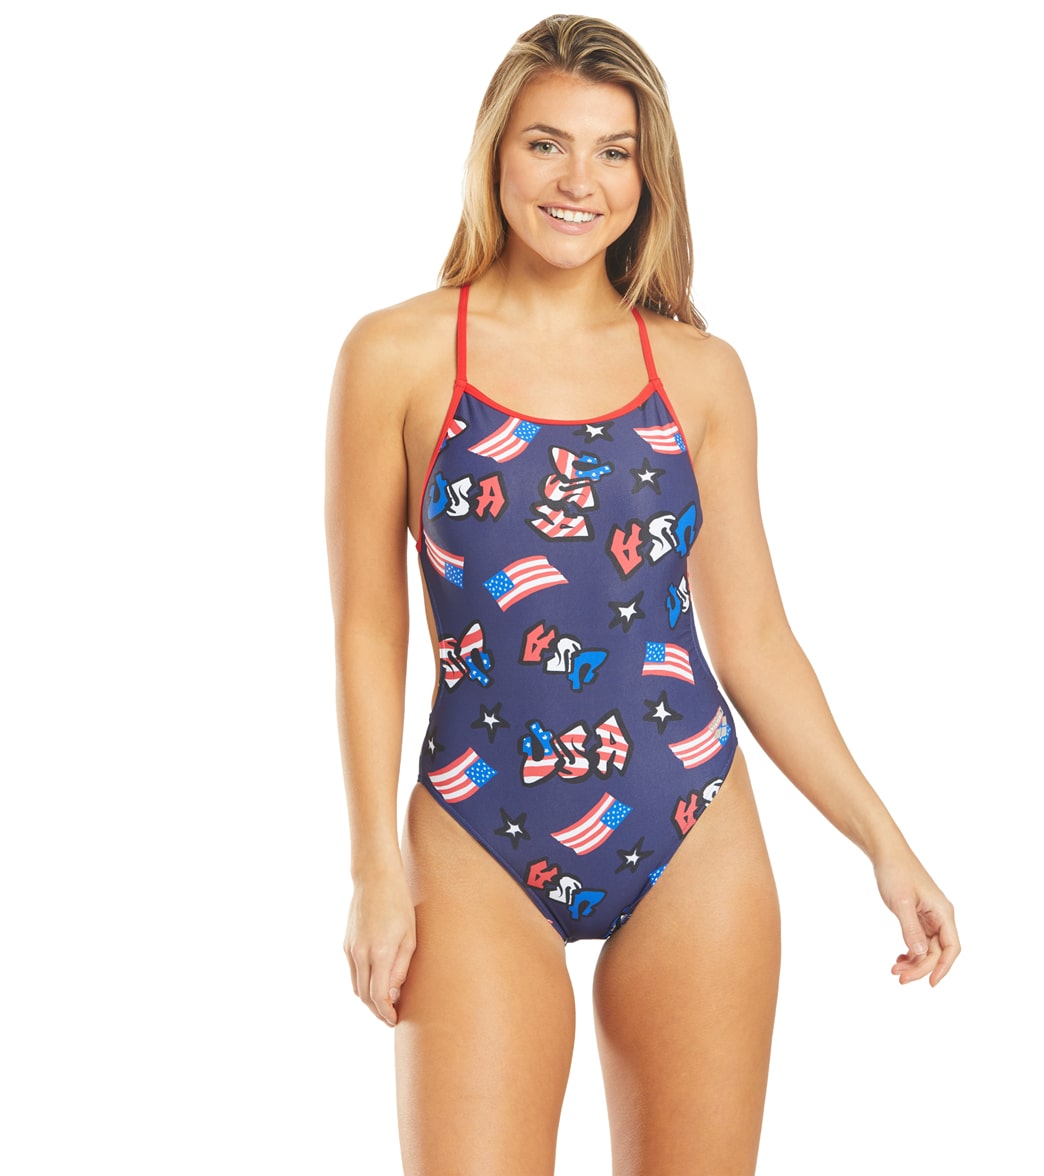 Arena Women's Graffiti Usa Booster Back One Piece Swimsuit - Red/Multi 26 - Swimoutlet.com